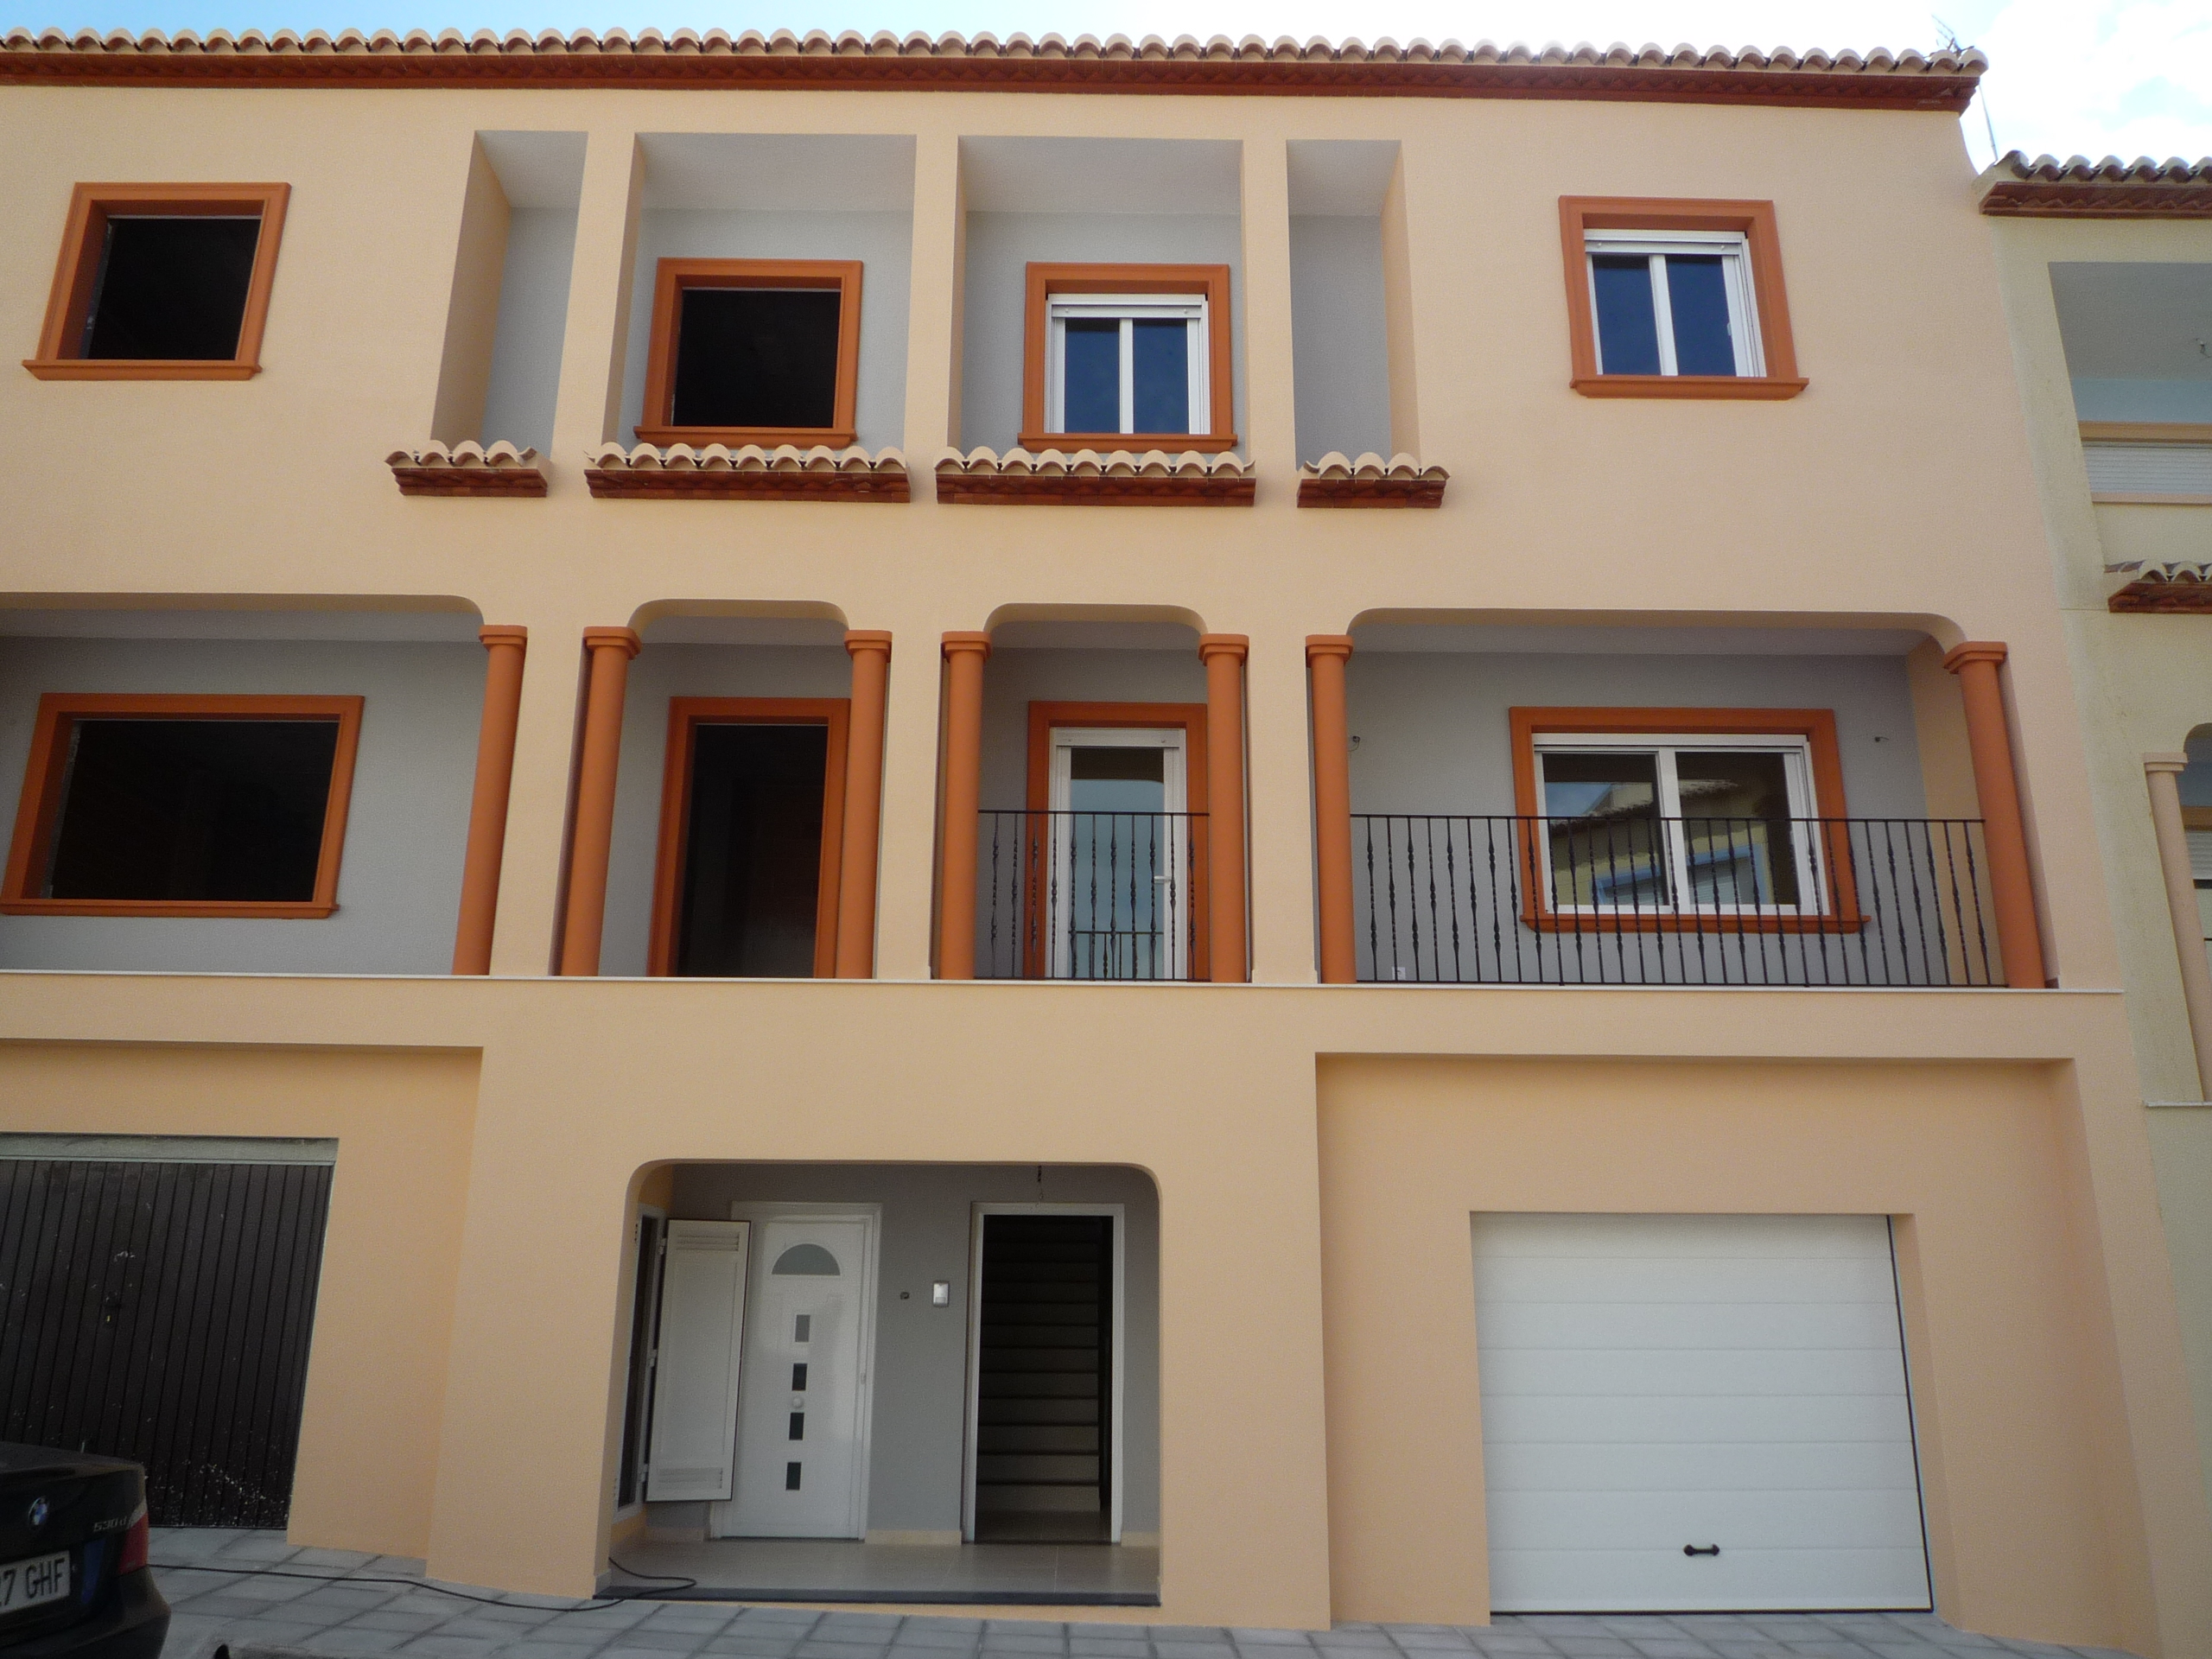 Qlistings New Build 3 and 4 Bedroom Town Houses in Teulada image 3